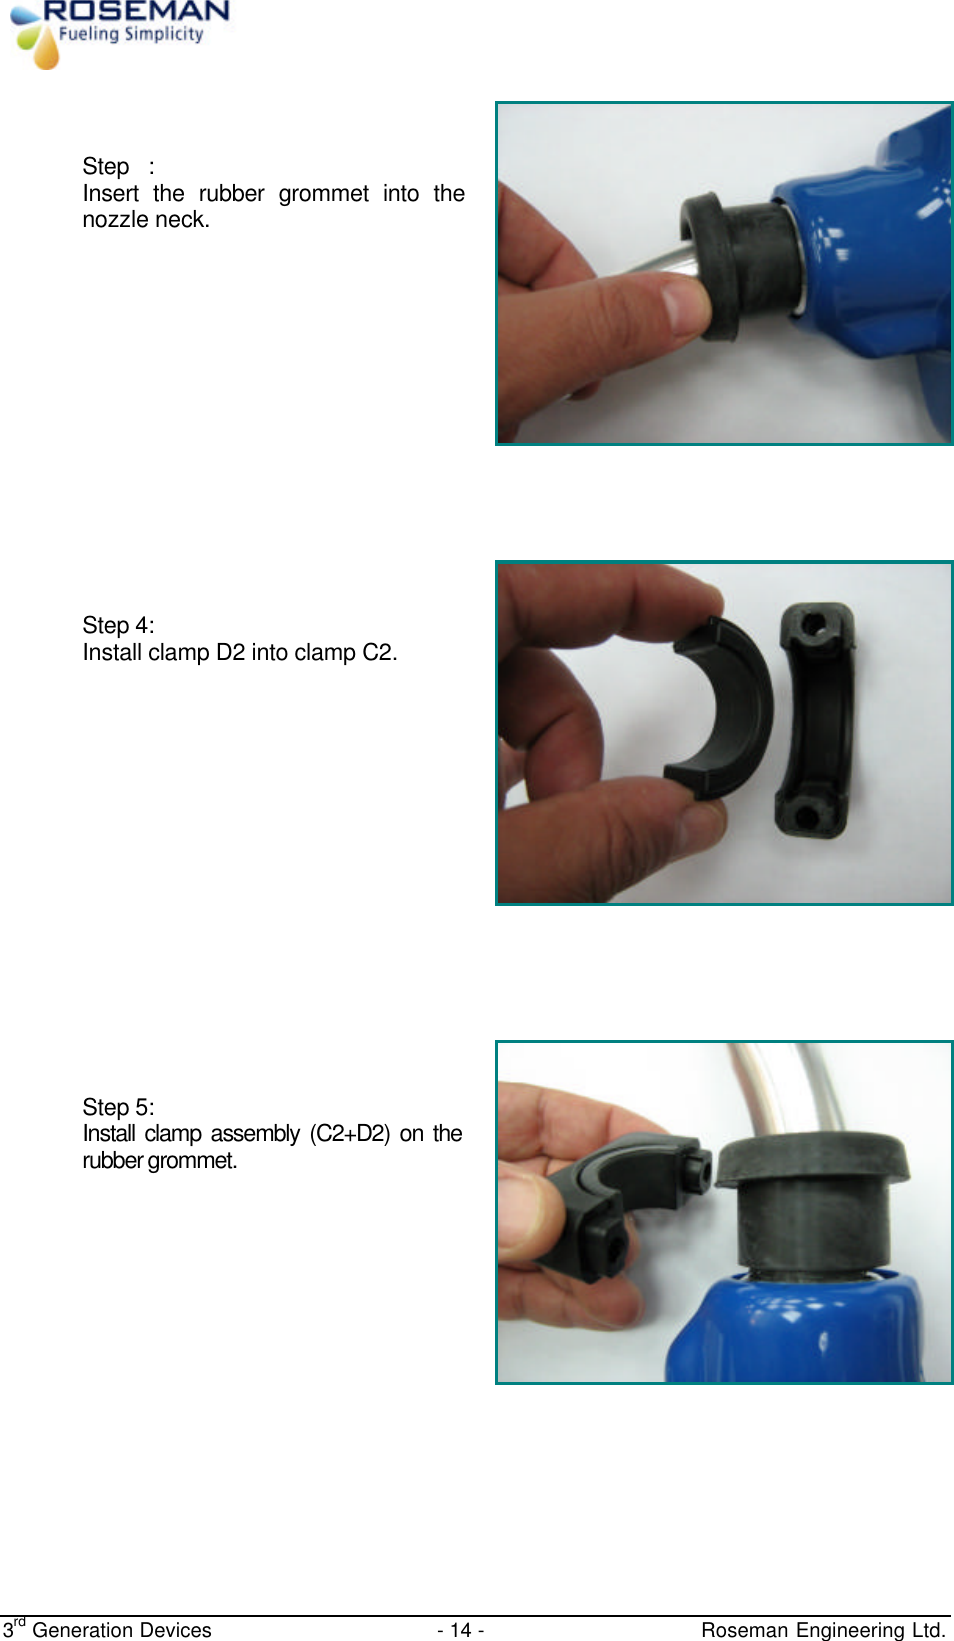  3rd Generation Devices - 14 -   Roseman Engineering Ltd.    Step  : Insert the rubber grommet into the nozzle neck.       Step 4: Install clamp D2 into clamp C2.        Step 5: Install clamp assembly (C2+D2) on the rubber grommet.    